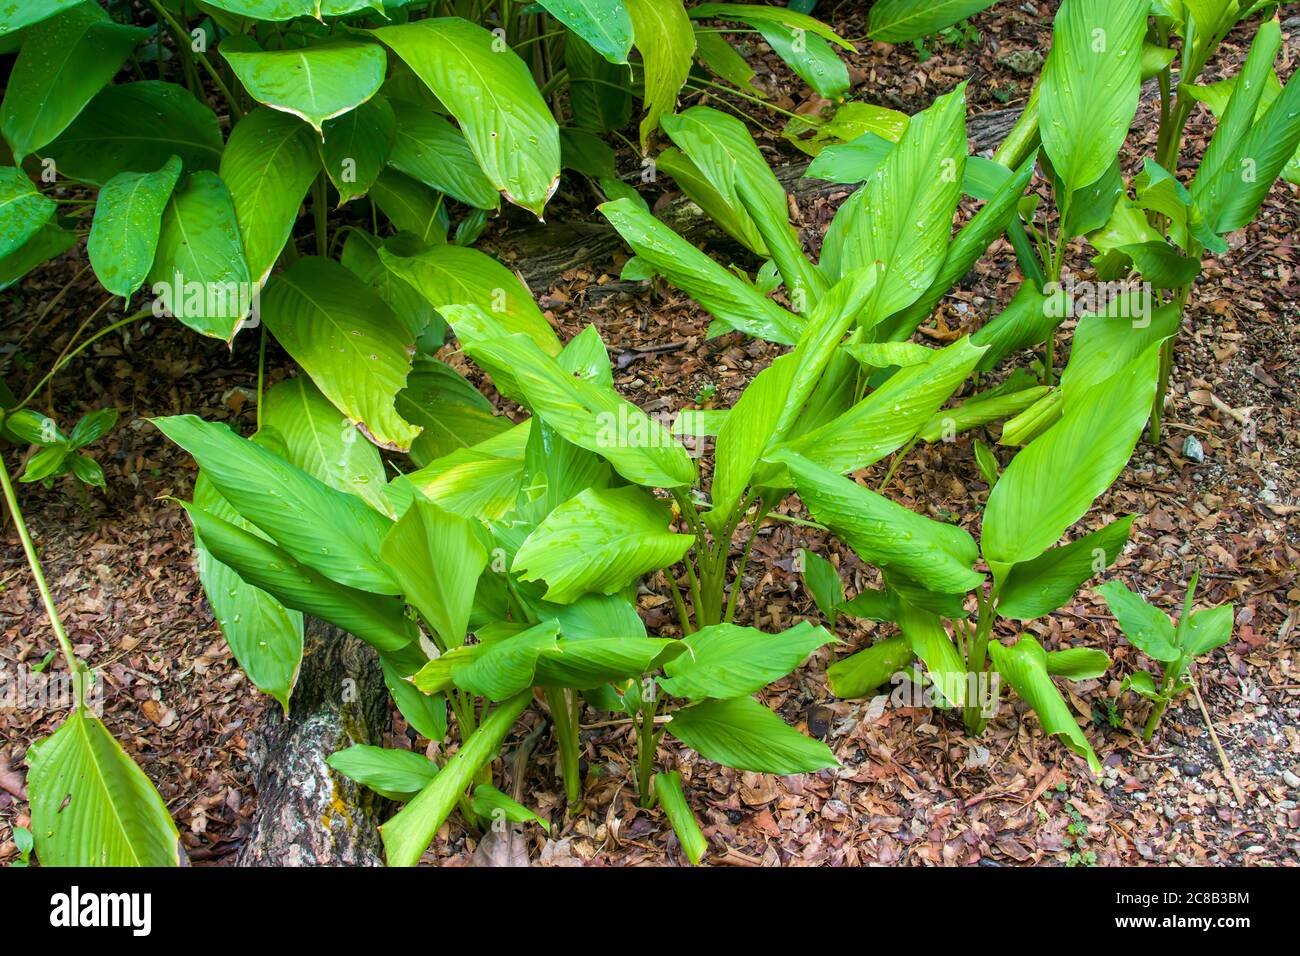 Turmeric (Curcuma longa) is a flowering plant, the ginger family, Zingiberaceae, the roots of which are used in cooking. Stock Photo